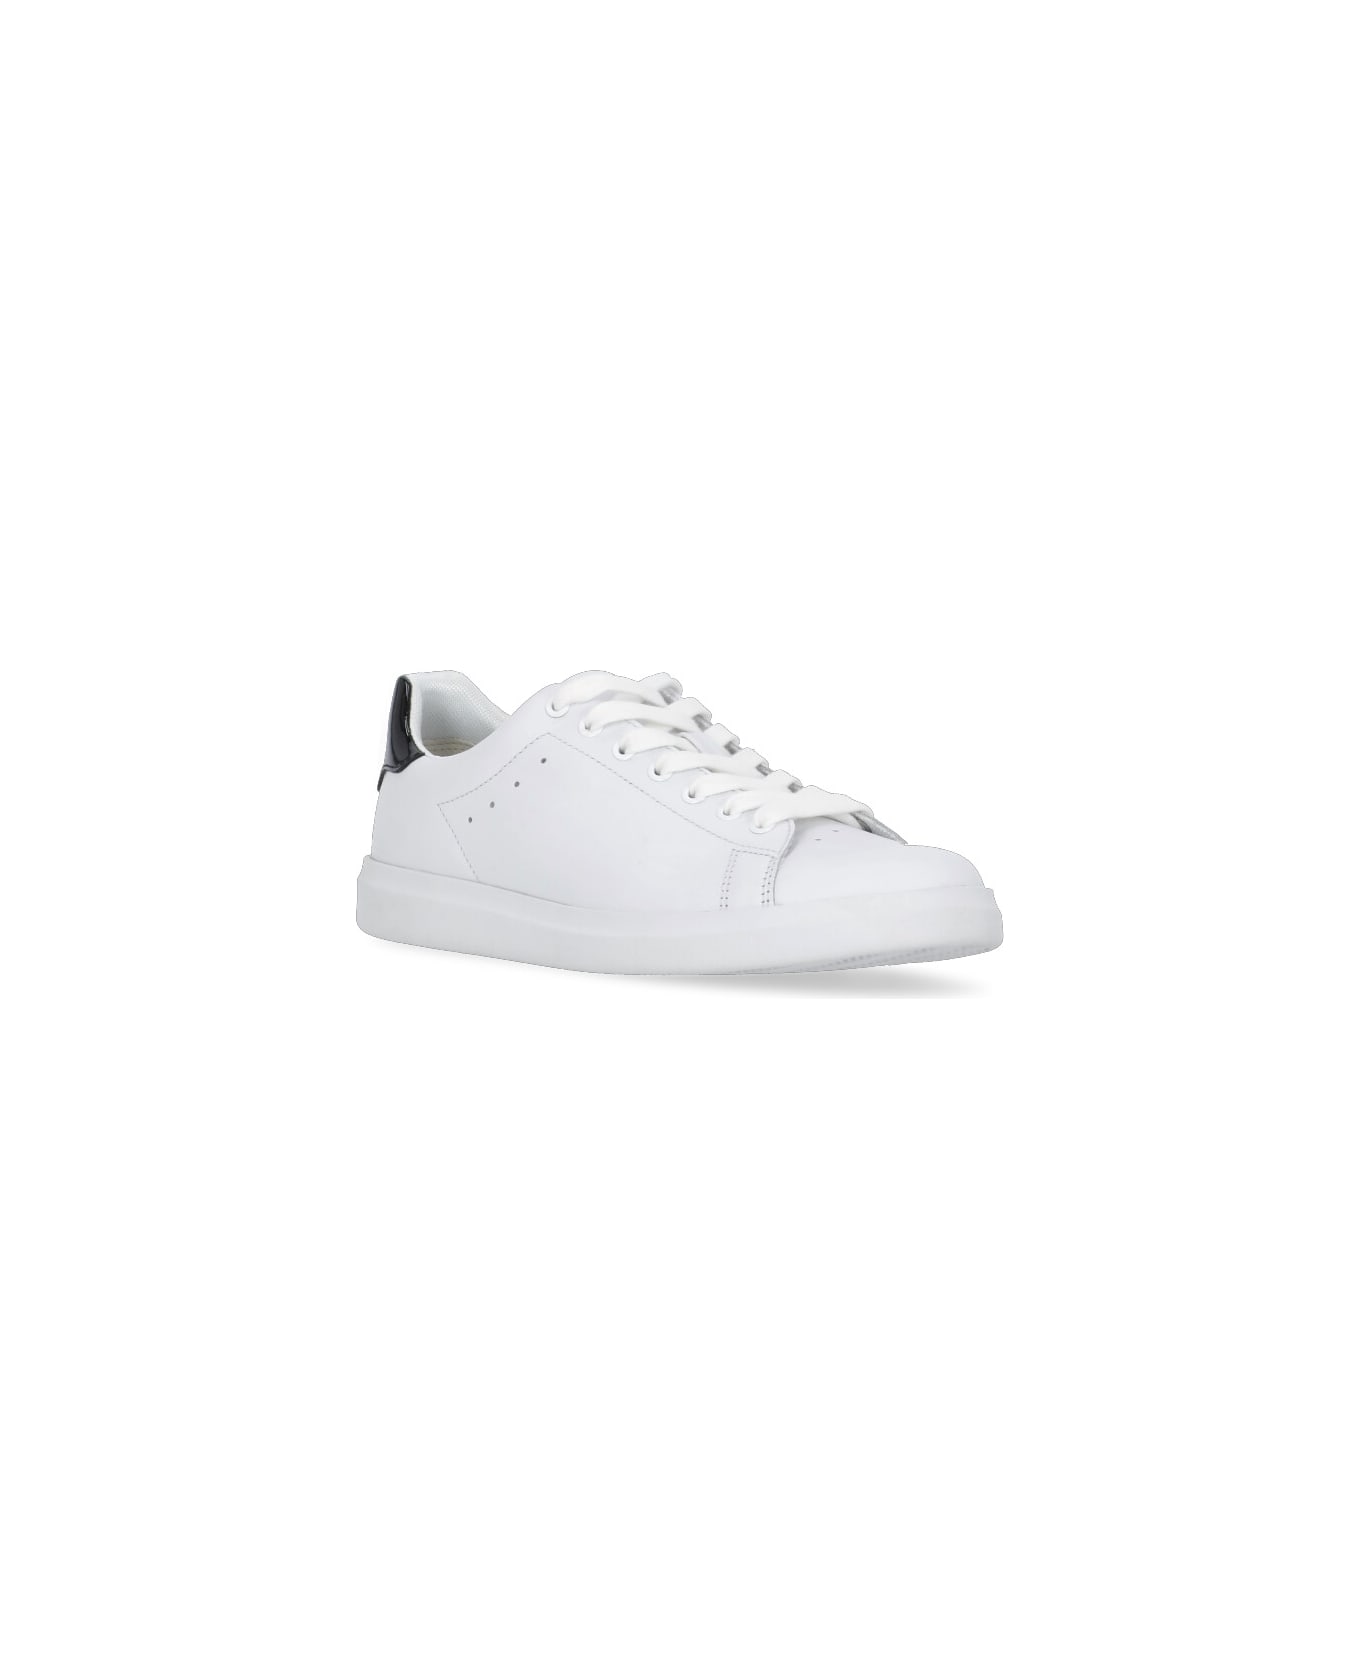 Tory Burch Leather Sneakers - White